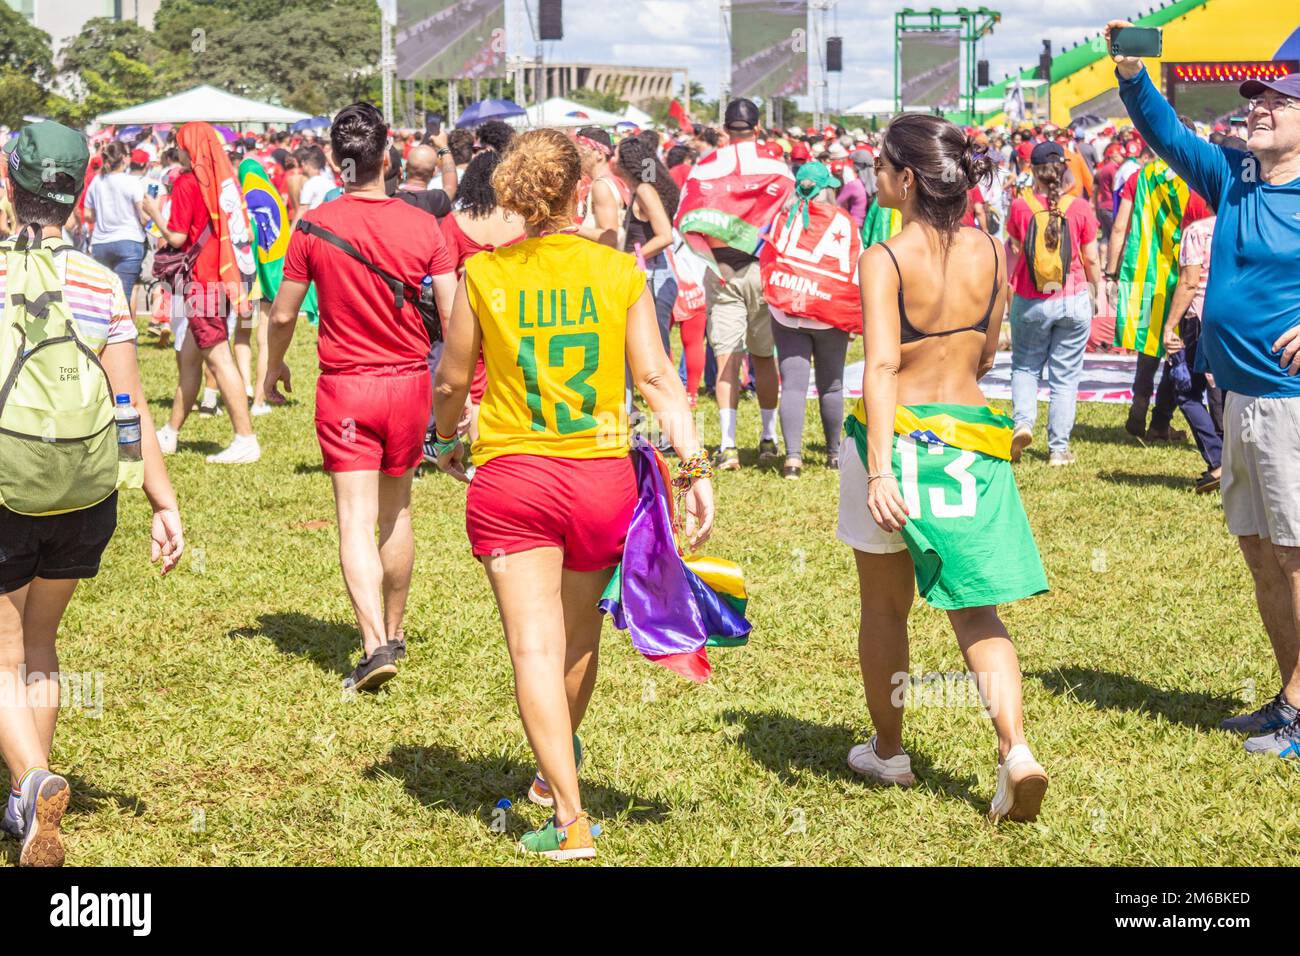 Brasília, DF, Brazil – January 01, 2023: Two women walking in shirts with the number 13 on them. Photo taken at the inauguration event. Stock Photo